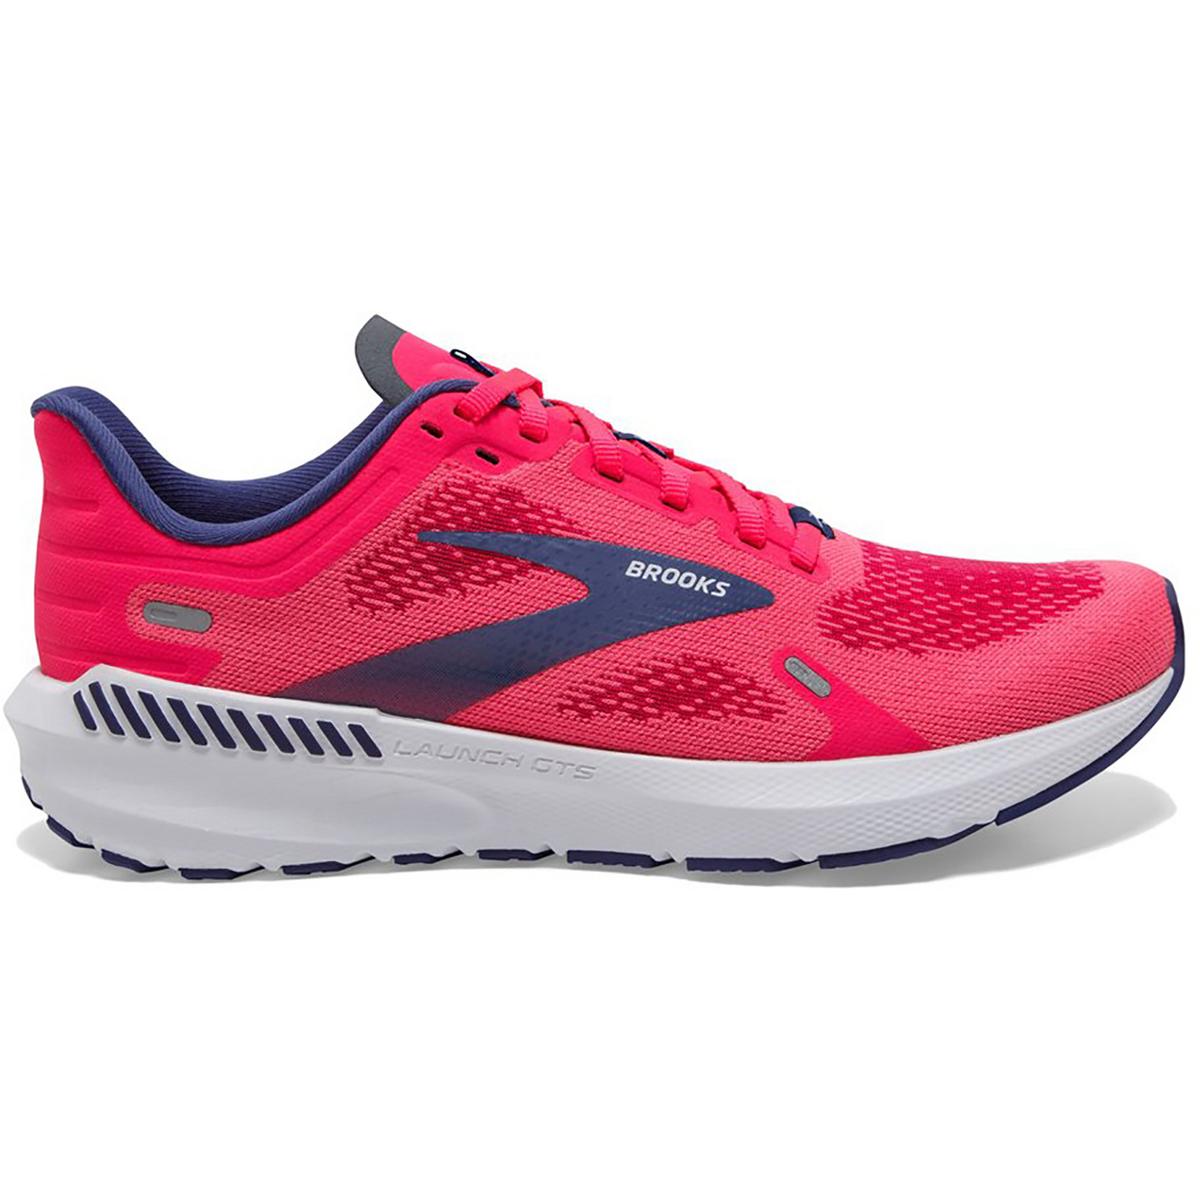 Brooks Launch GTS 9 Womens Fitness Gym Athletic and Training Shoes